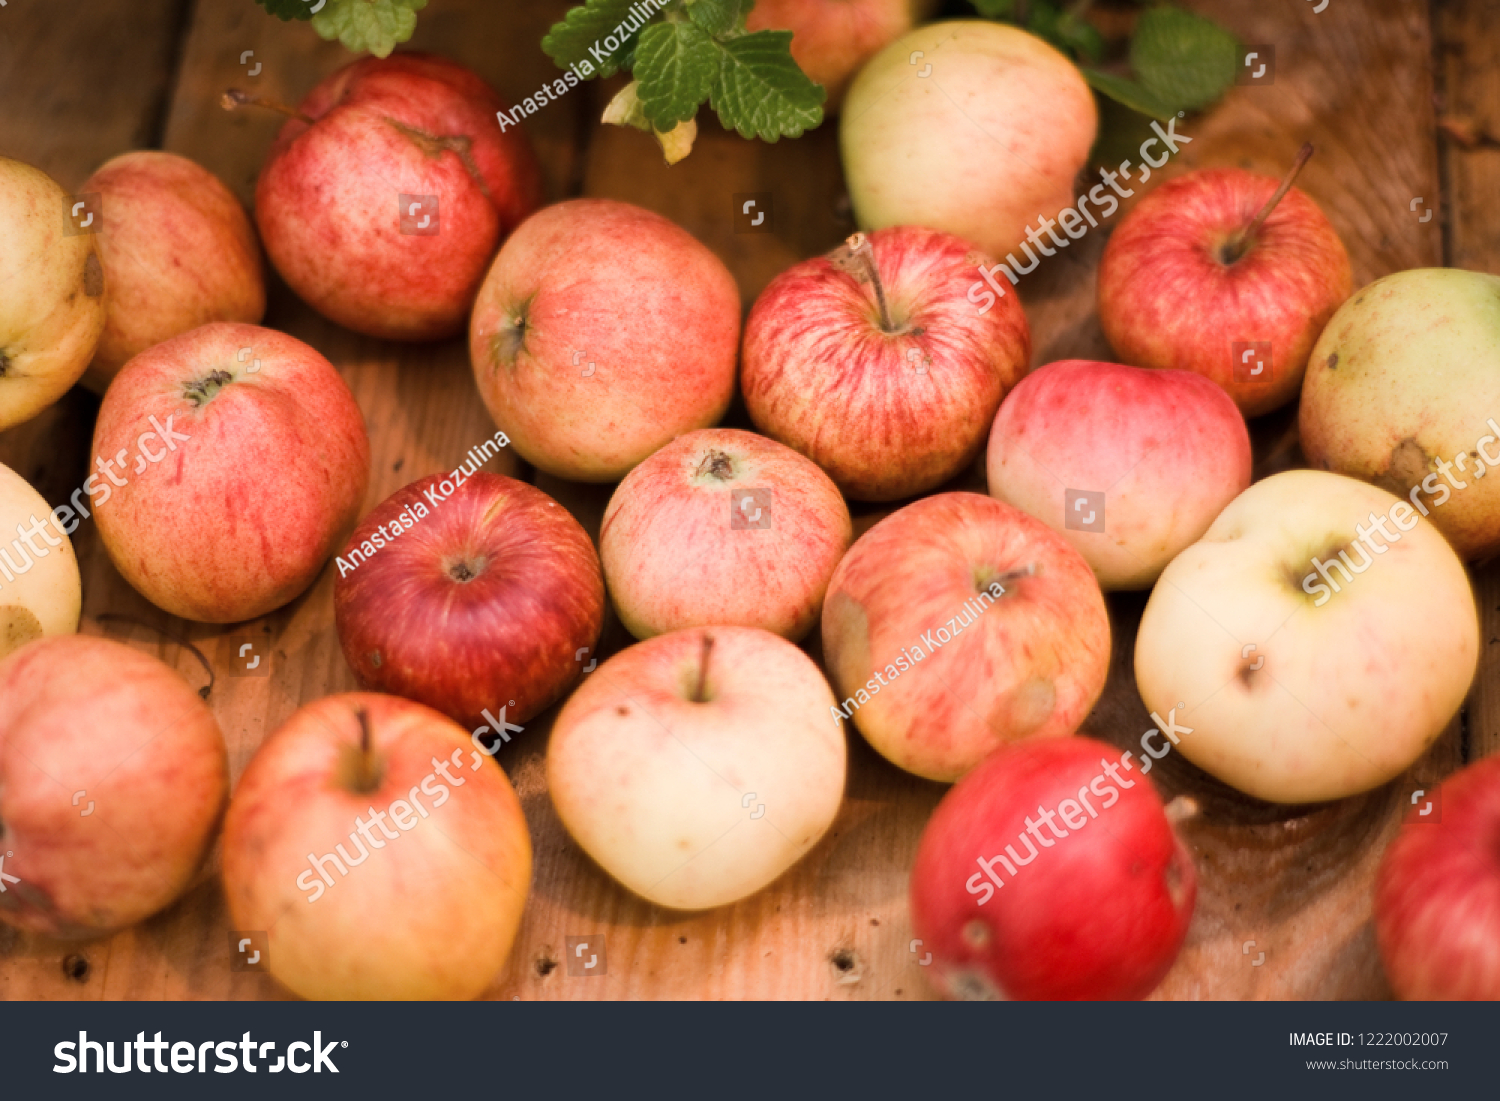 Many red apples on a wooden table #1222002007